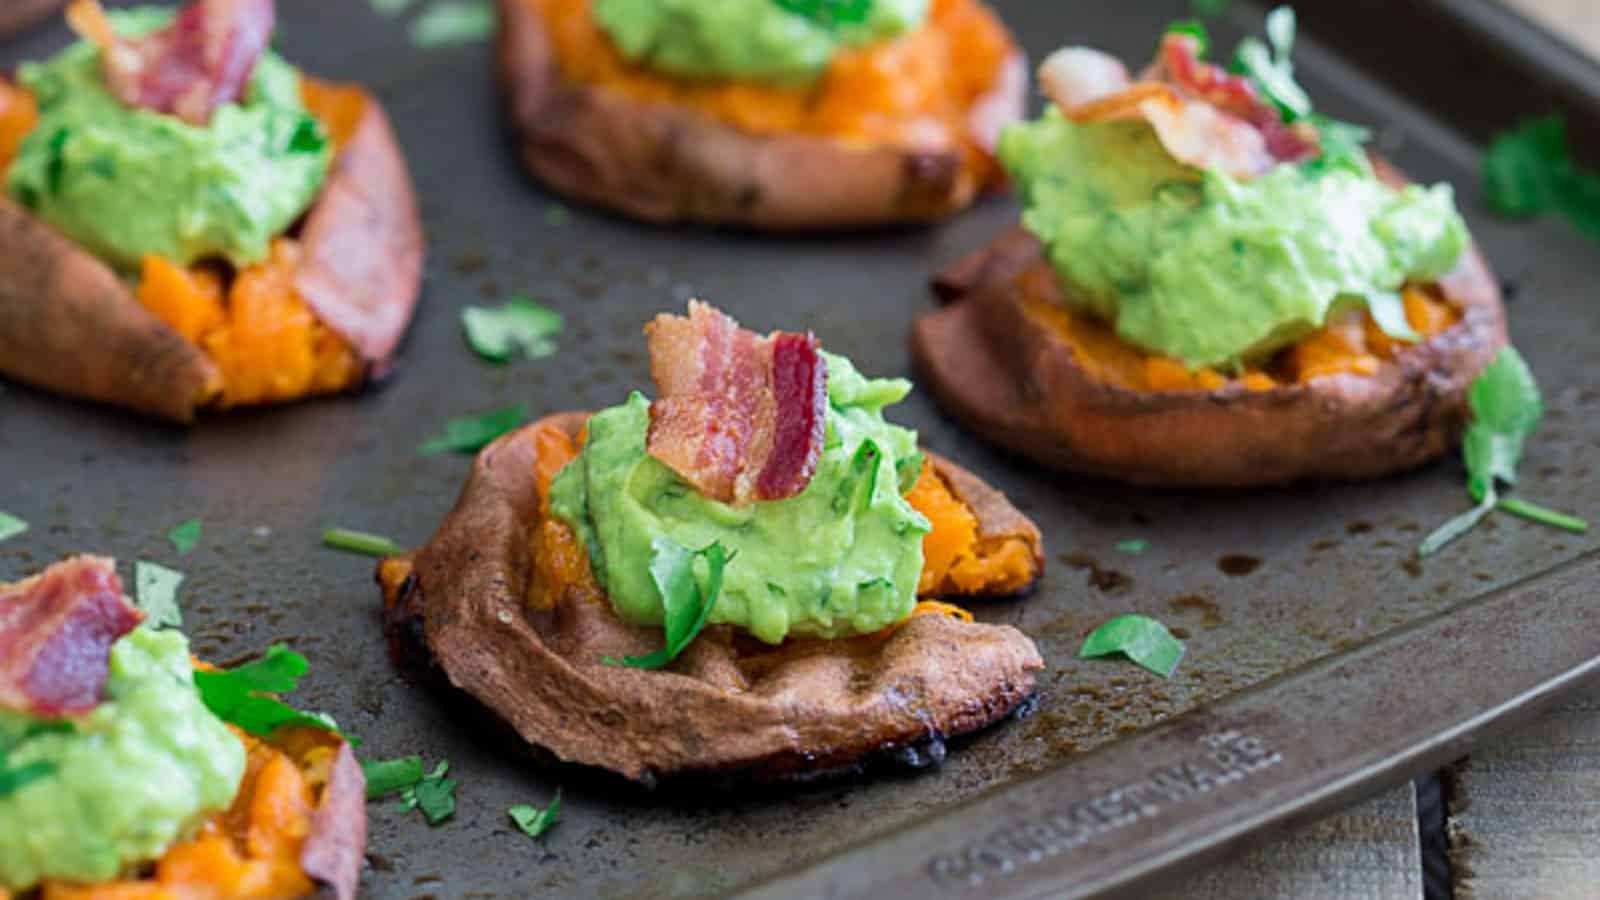 Sweet potato bites topped with guacamole and bacon.